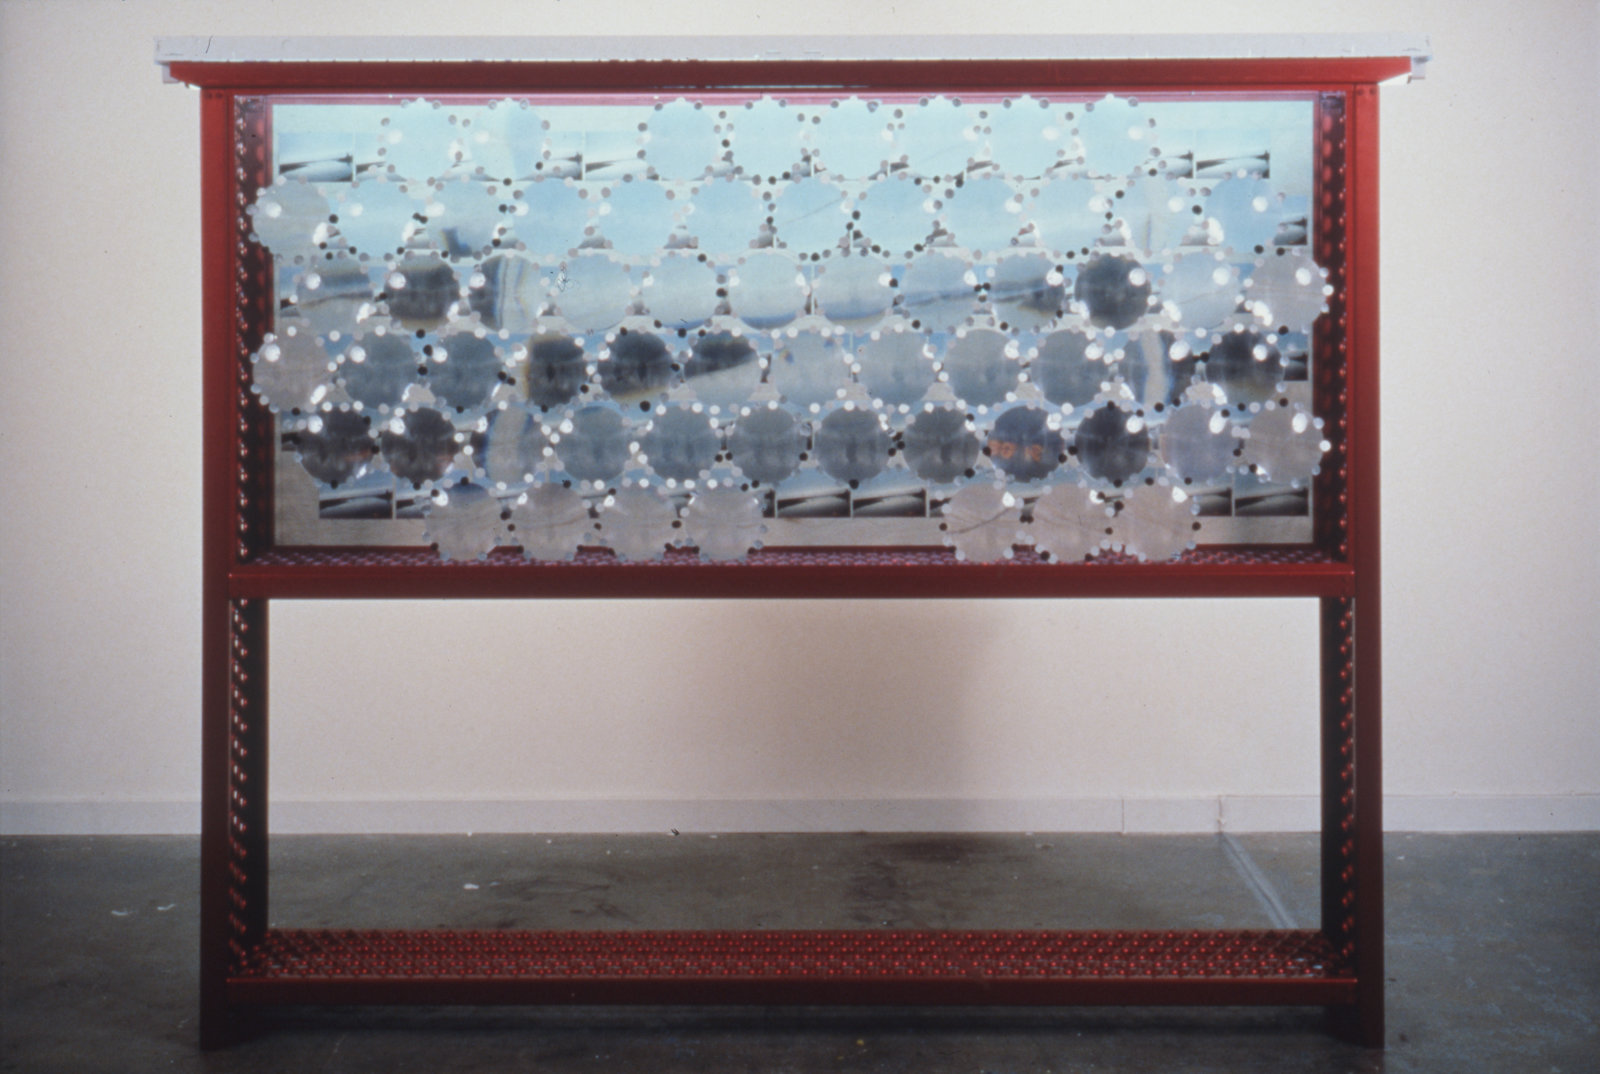 Jerry Pethick, Rossbrin Cabinet, 1997–2000, glass, photos, lenses, anodized aluminum, 73 x 83 x 12 in. (185 x 211 x 31 cm)